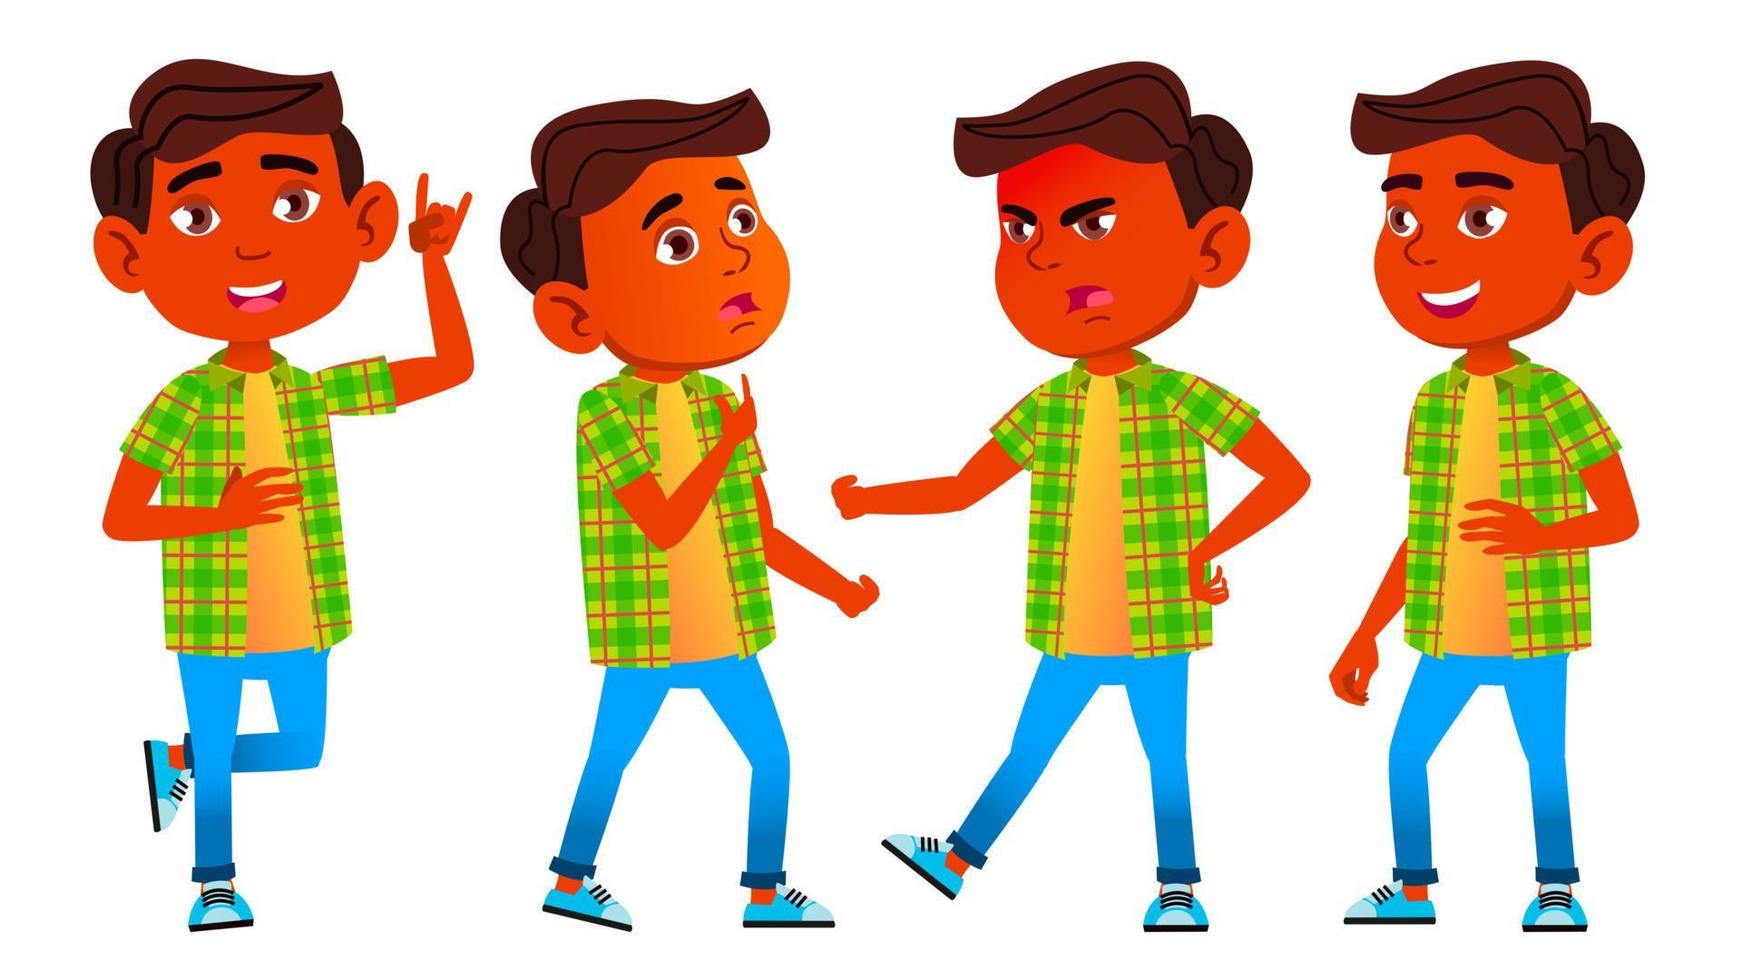 Boy Schoolboy Kid Poses Set Vector. Indian, Hindu. Asian. Primary School Child. Cheerful Pupil. Teenager, Classroom. For Postcard, Announcement, Cover Design. Isolated Cartoon Illustration vector